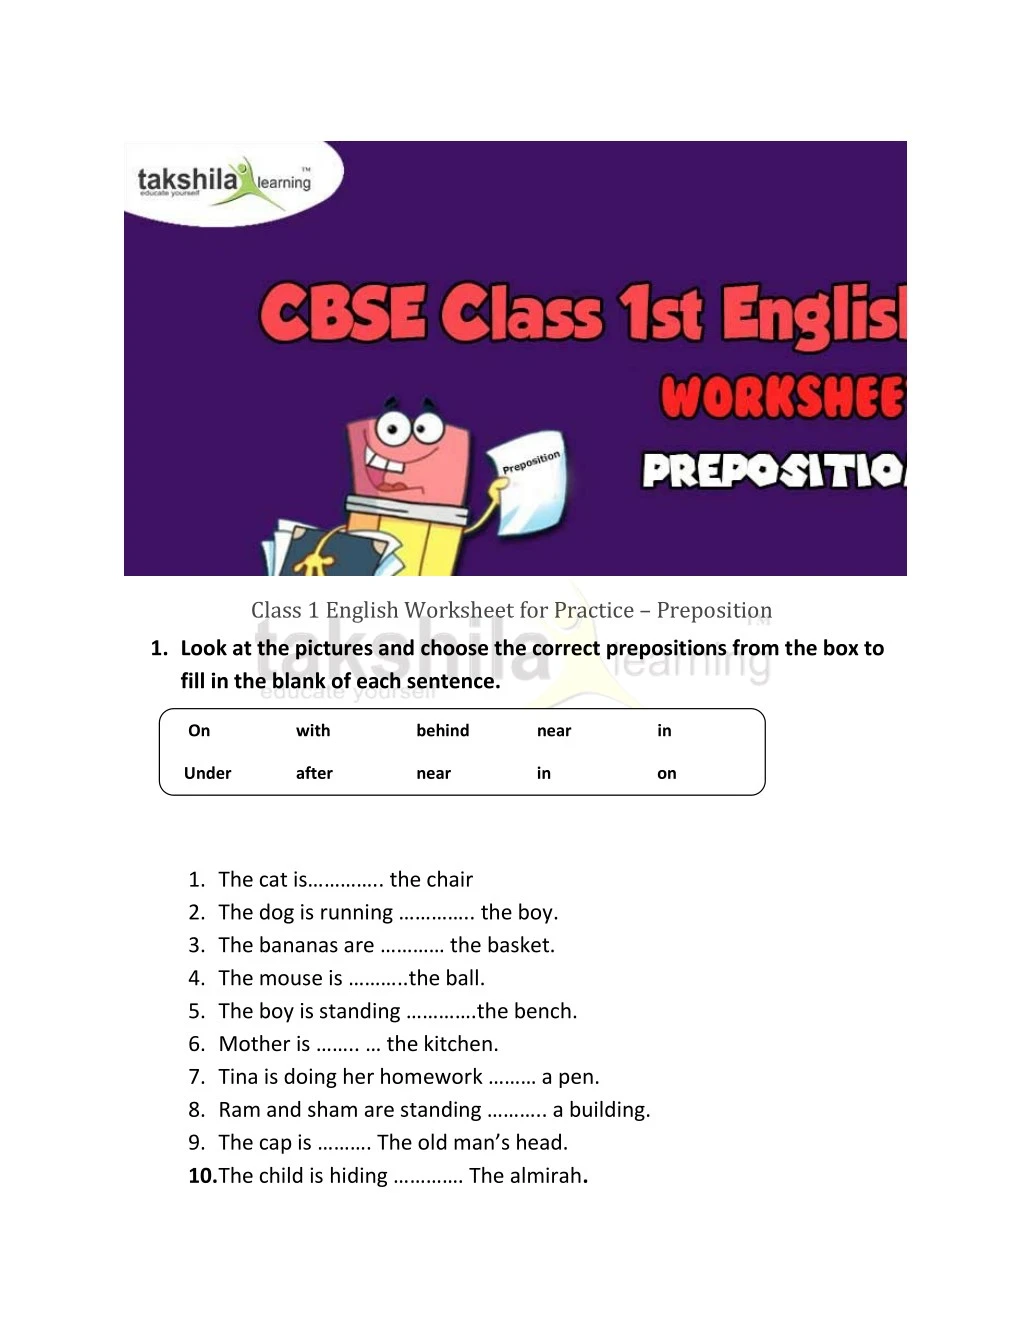 class 1 english worksheet for practice